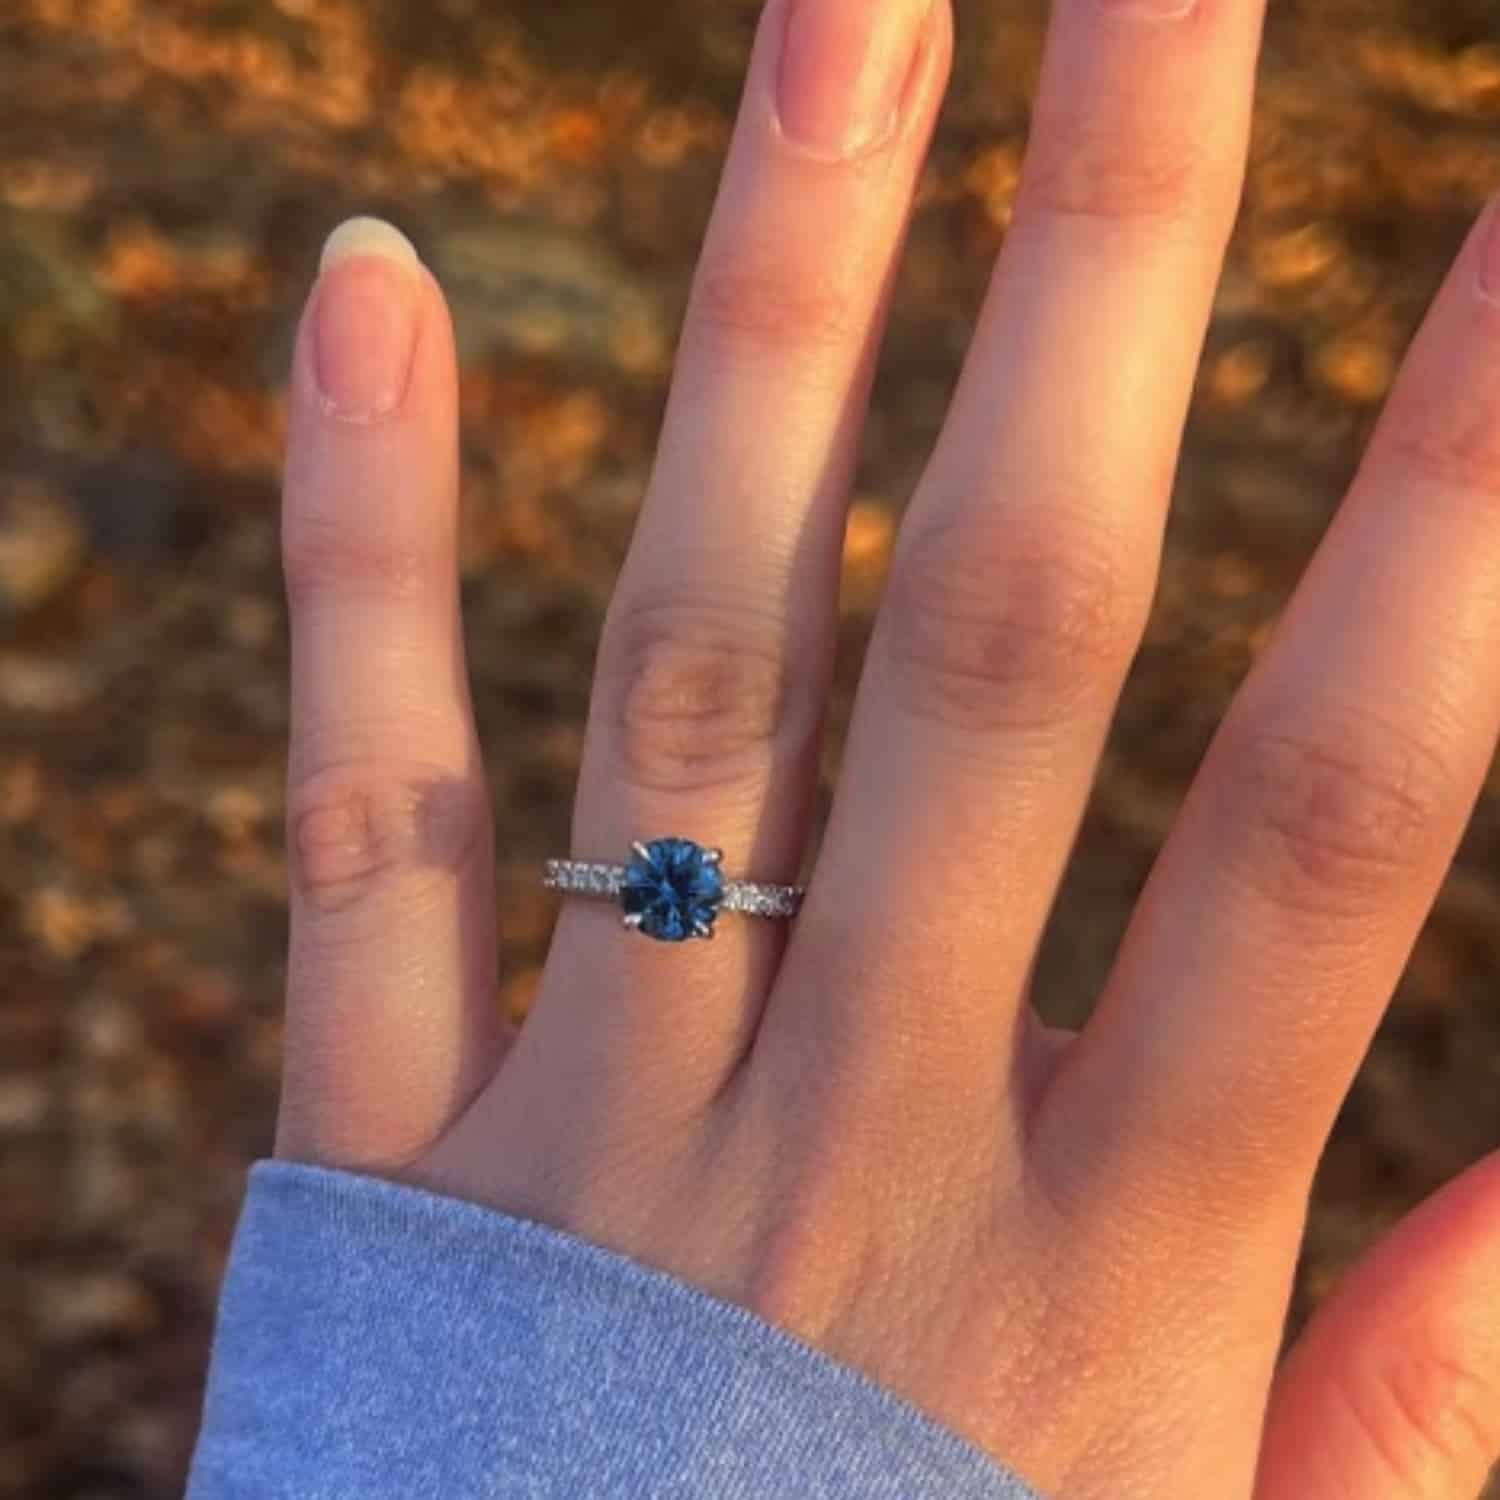 An engagement photo from a customer review, featuring a "Marina" ring with blue Montana sapphire on an elegant hand against a backdrop of fall leaves.